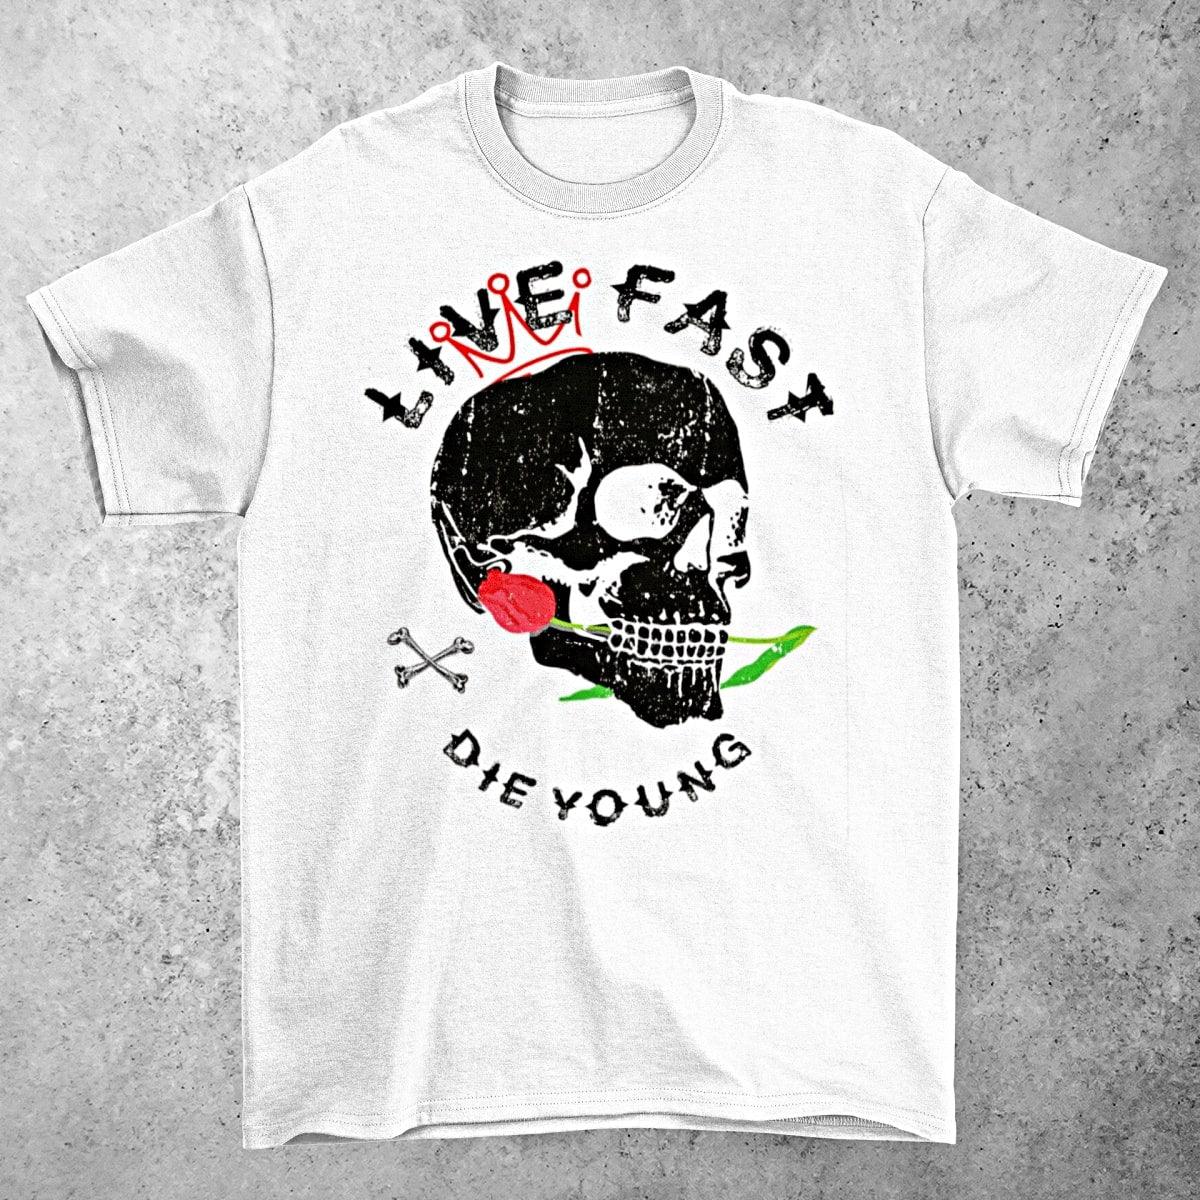 Compre a Camiseta Live Young - MRLIFE